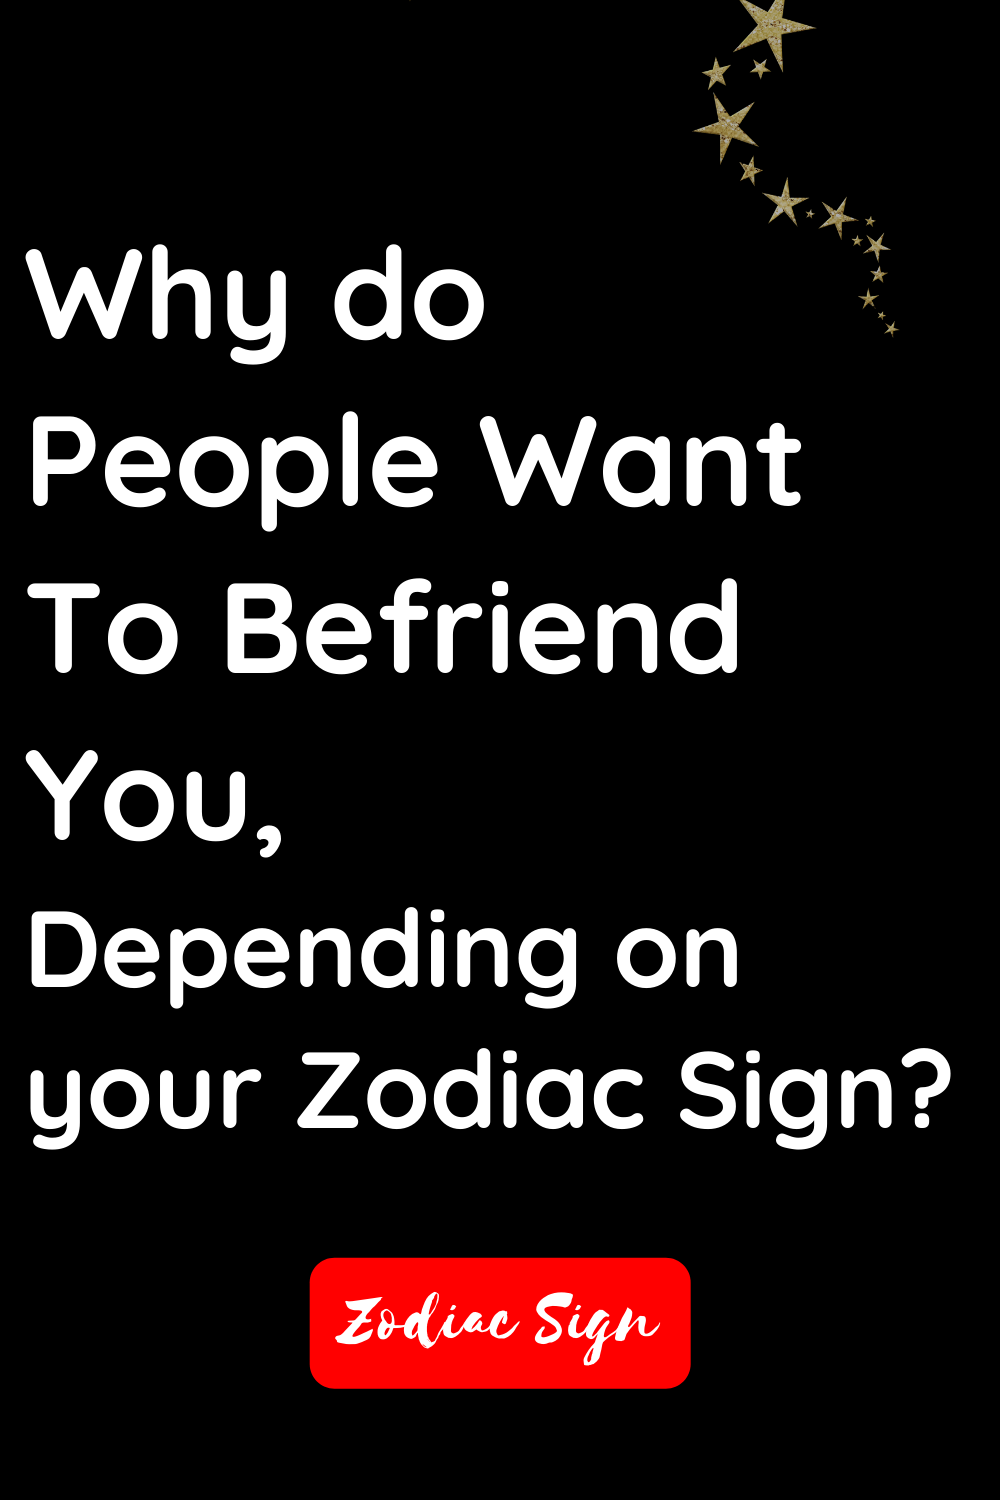 Why do people want to befriend you, depending on your zodiac sign?